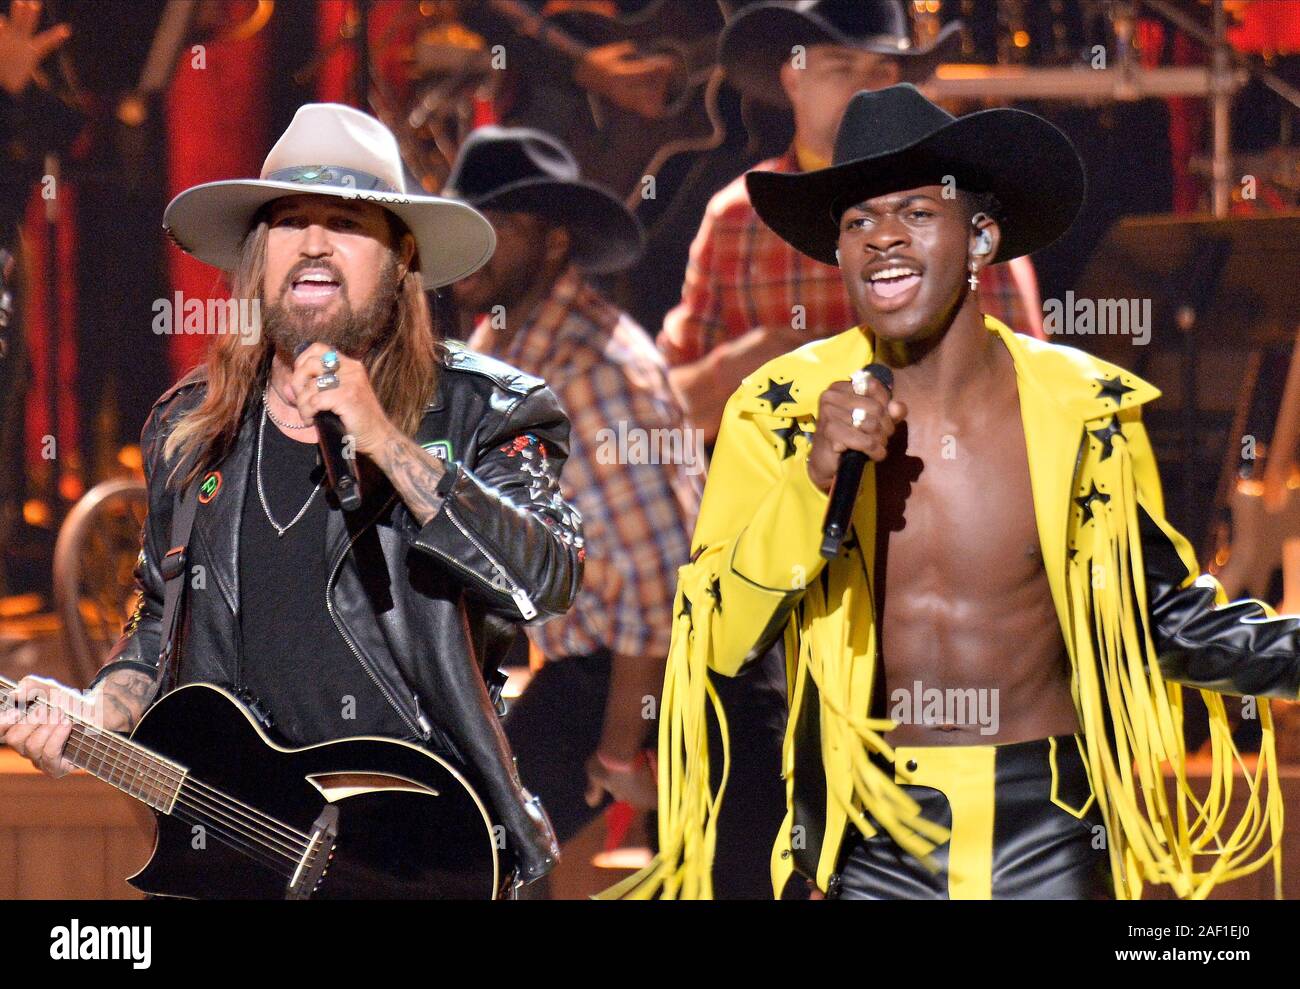 Los Angeles, United States. 12th Dec, 2019. Billy Ray Cyrus (L) and Lil Nas X perform during the 19th annual BET Awards at the Microsoft Theater in Los Angeles on June 23, 2019. The BET Awards were established in 2001 by the Black Entertainment Television network to celebrate African Americans and other American minorities in entertainment, culture, and sports over the past year. Photo by Jim Ruymen/UPI Credit: UPI/Alamy Live News Stock Photo